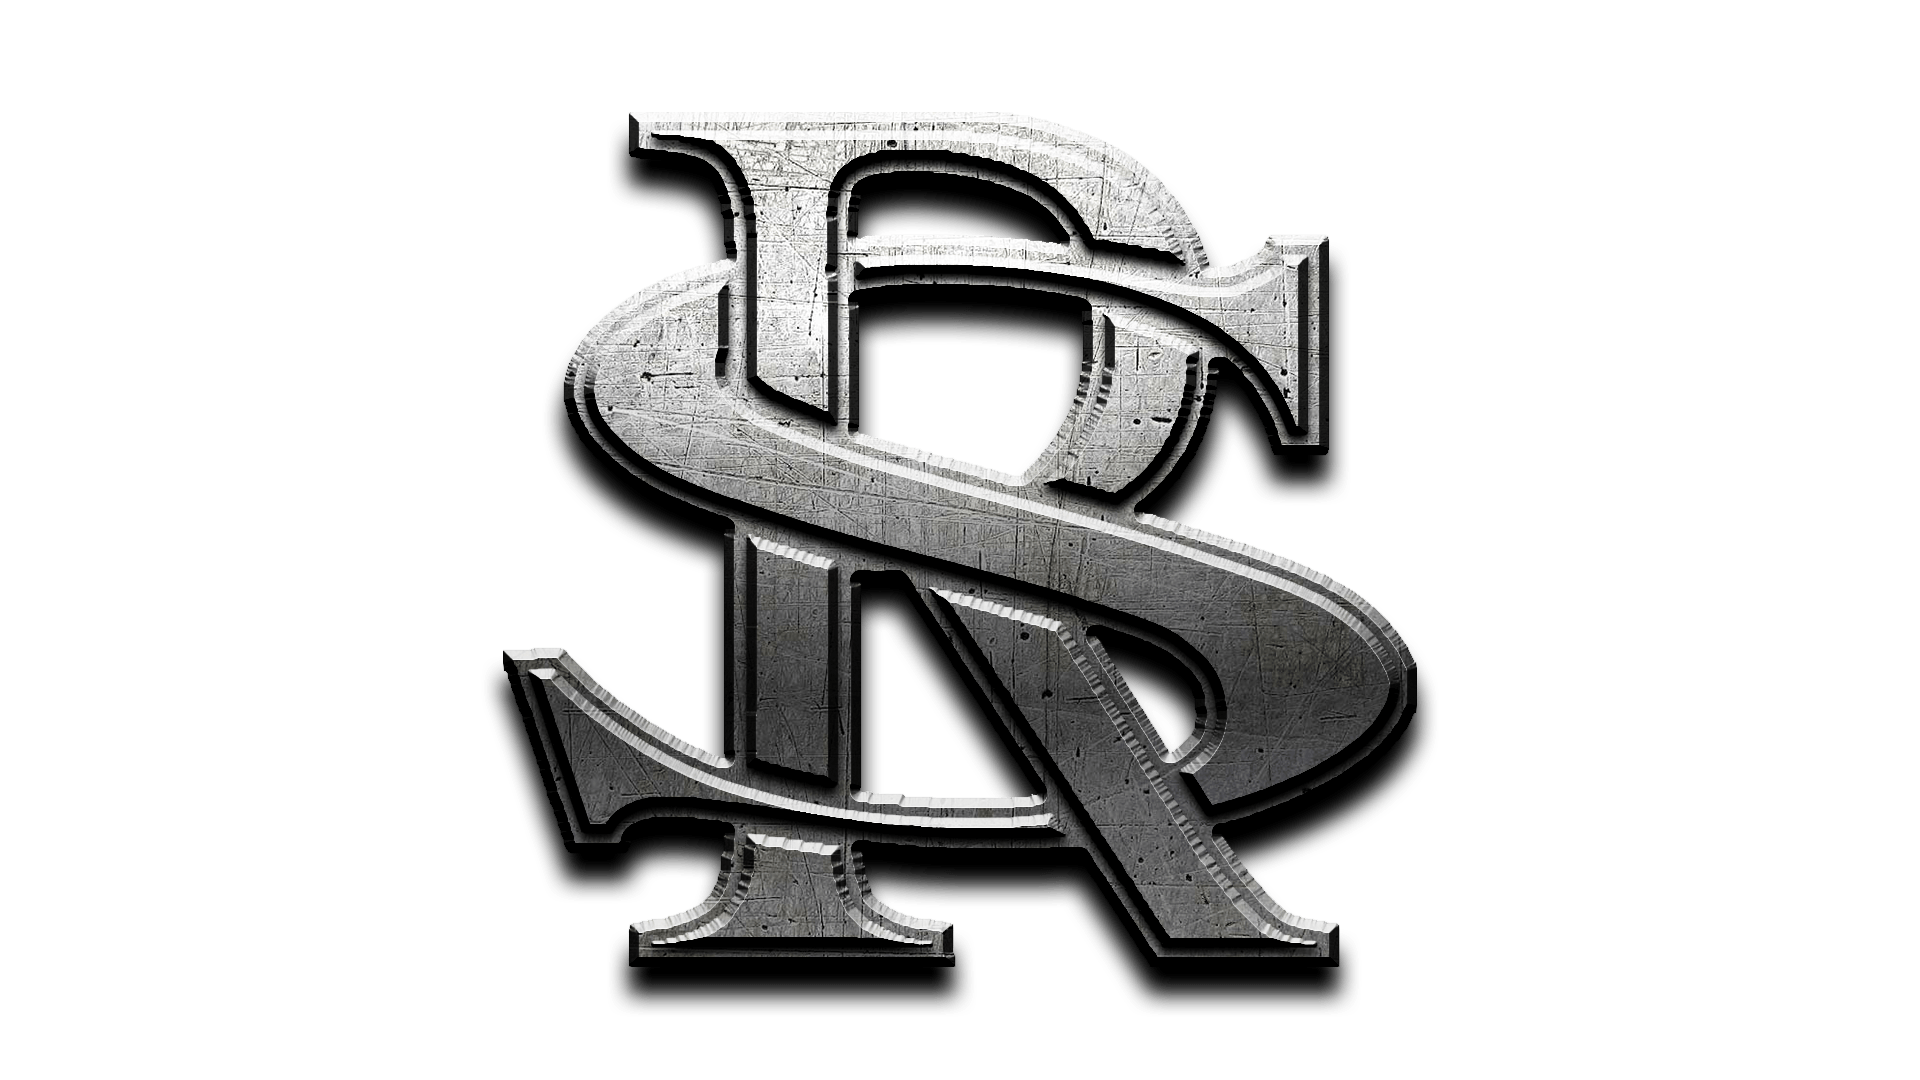 RS Logo - File Library